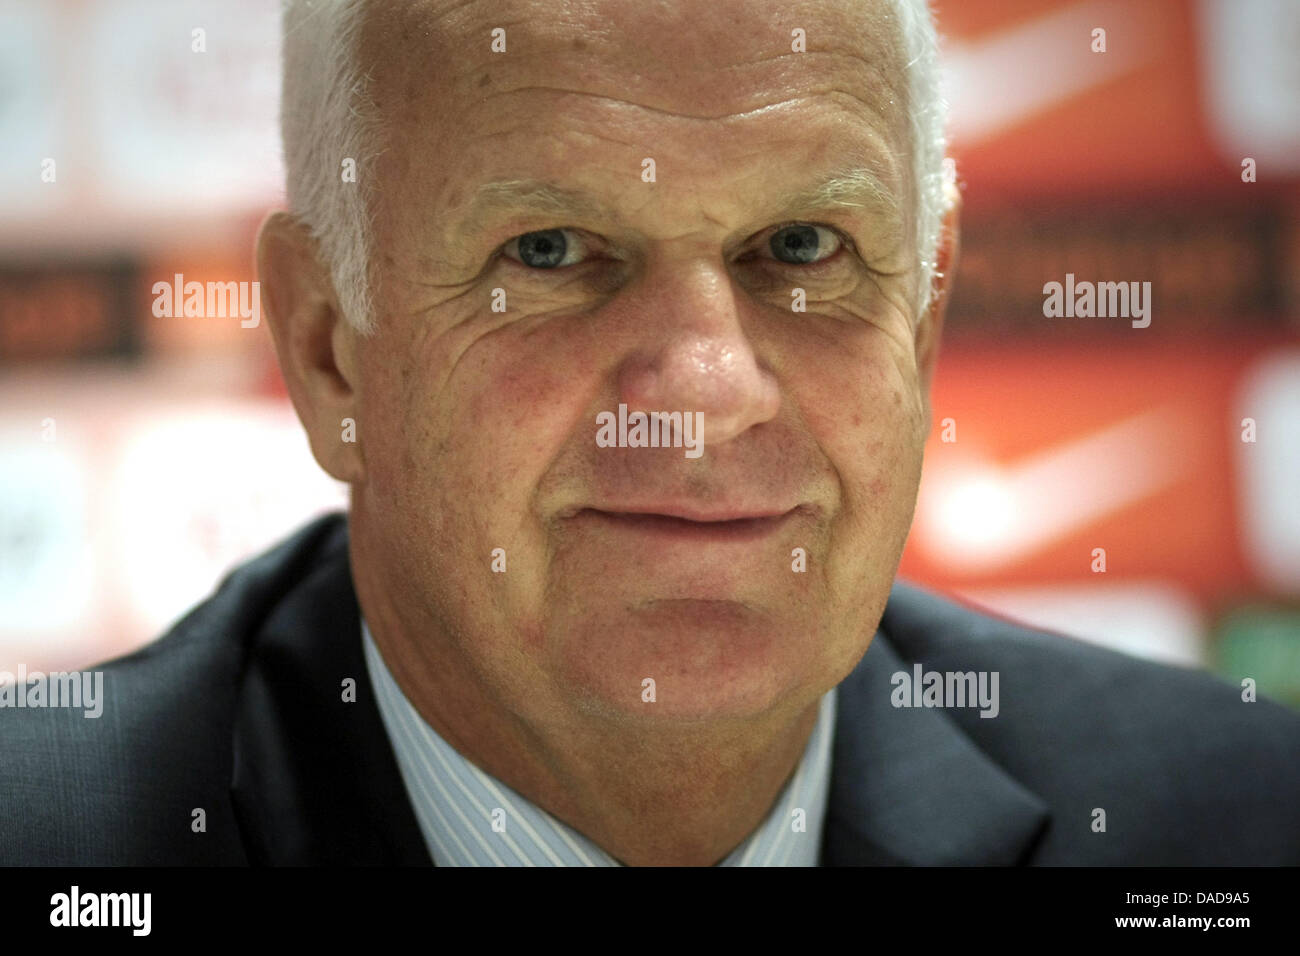 Belarus' coach Bernd Stange seen at a press conference after the international friendly soccer match between Poland and Belarus at the Brita Arena in Wiesbaden, Germany, 11 October 2011. Photo: Fredrik von Erichsen dpa/lhe Stock Photo